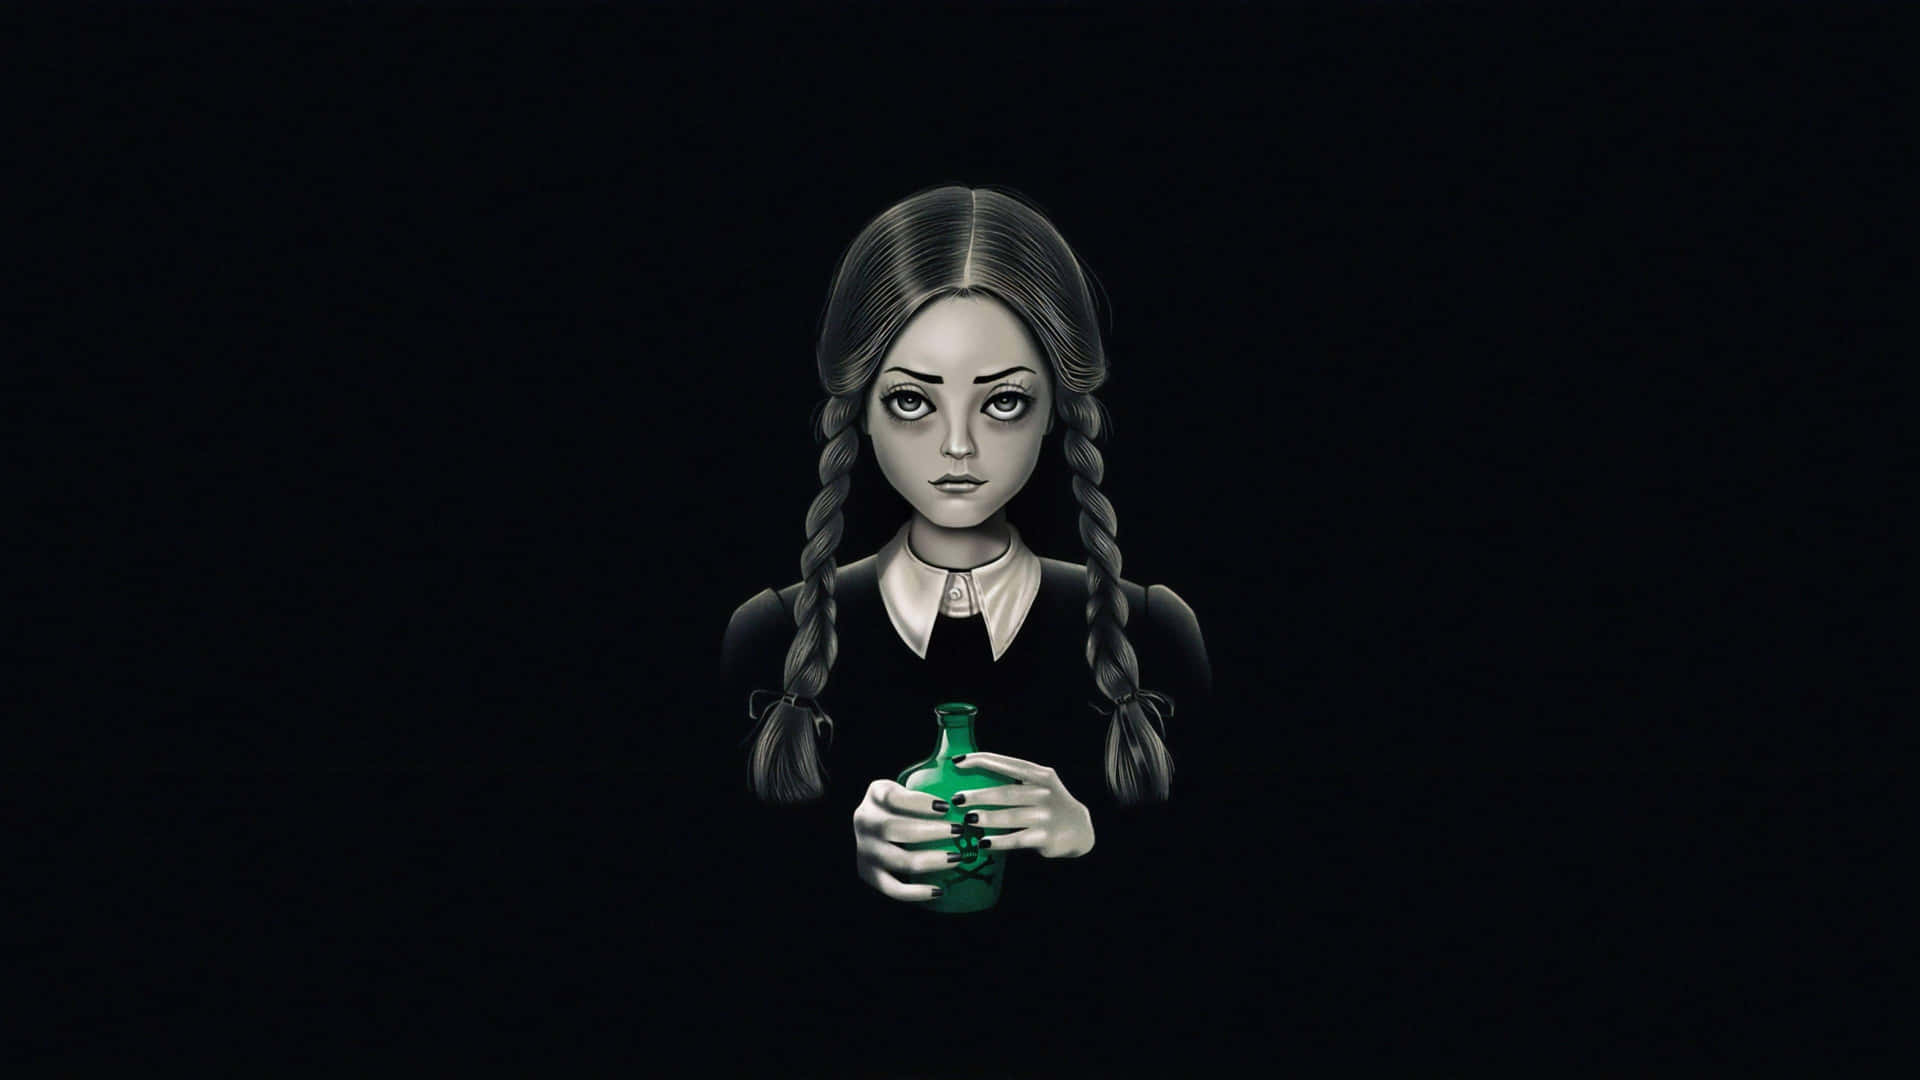 Wednesday Addams With Potion Wallpaper